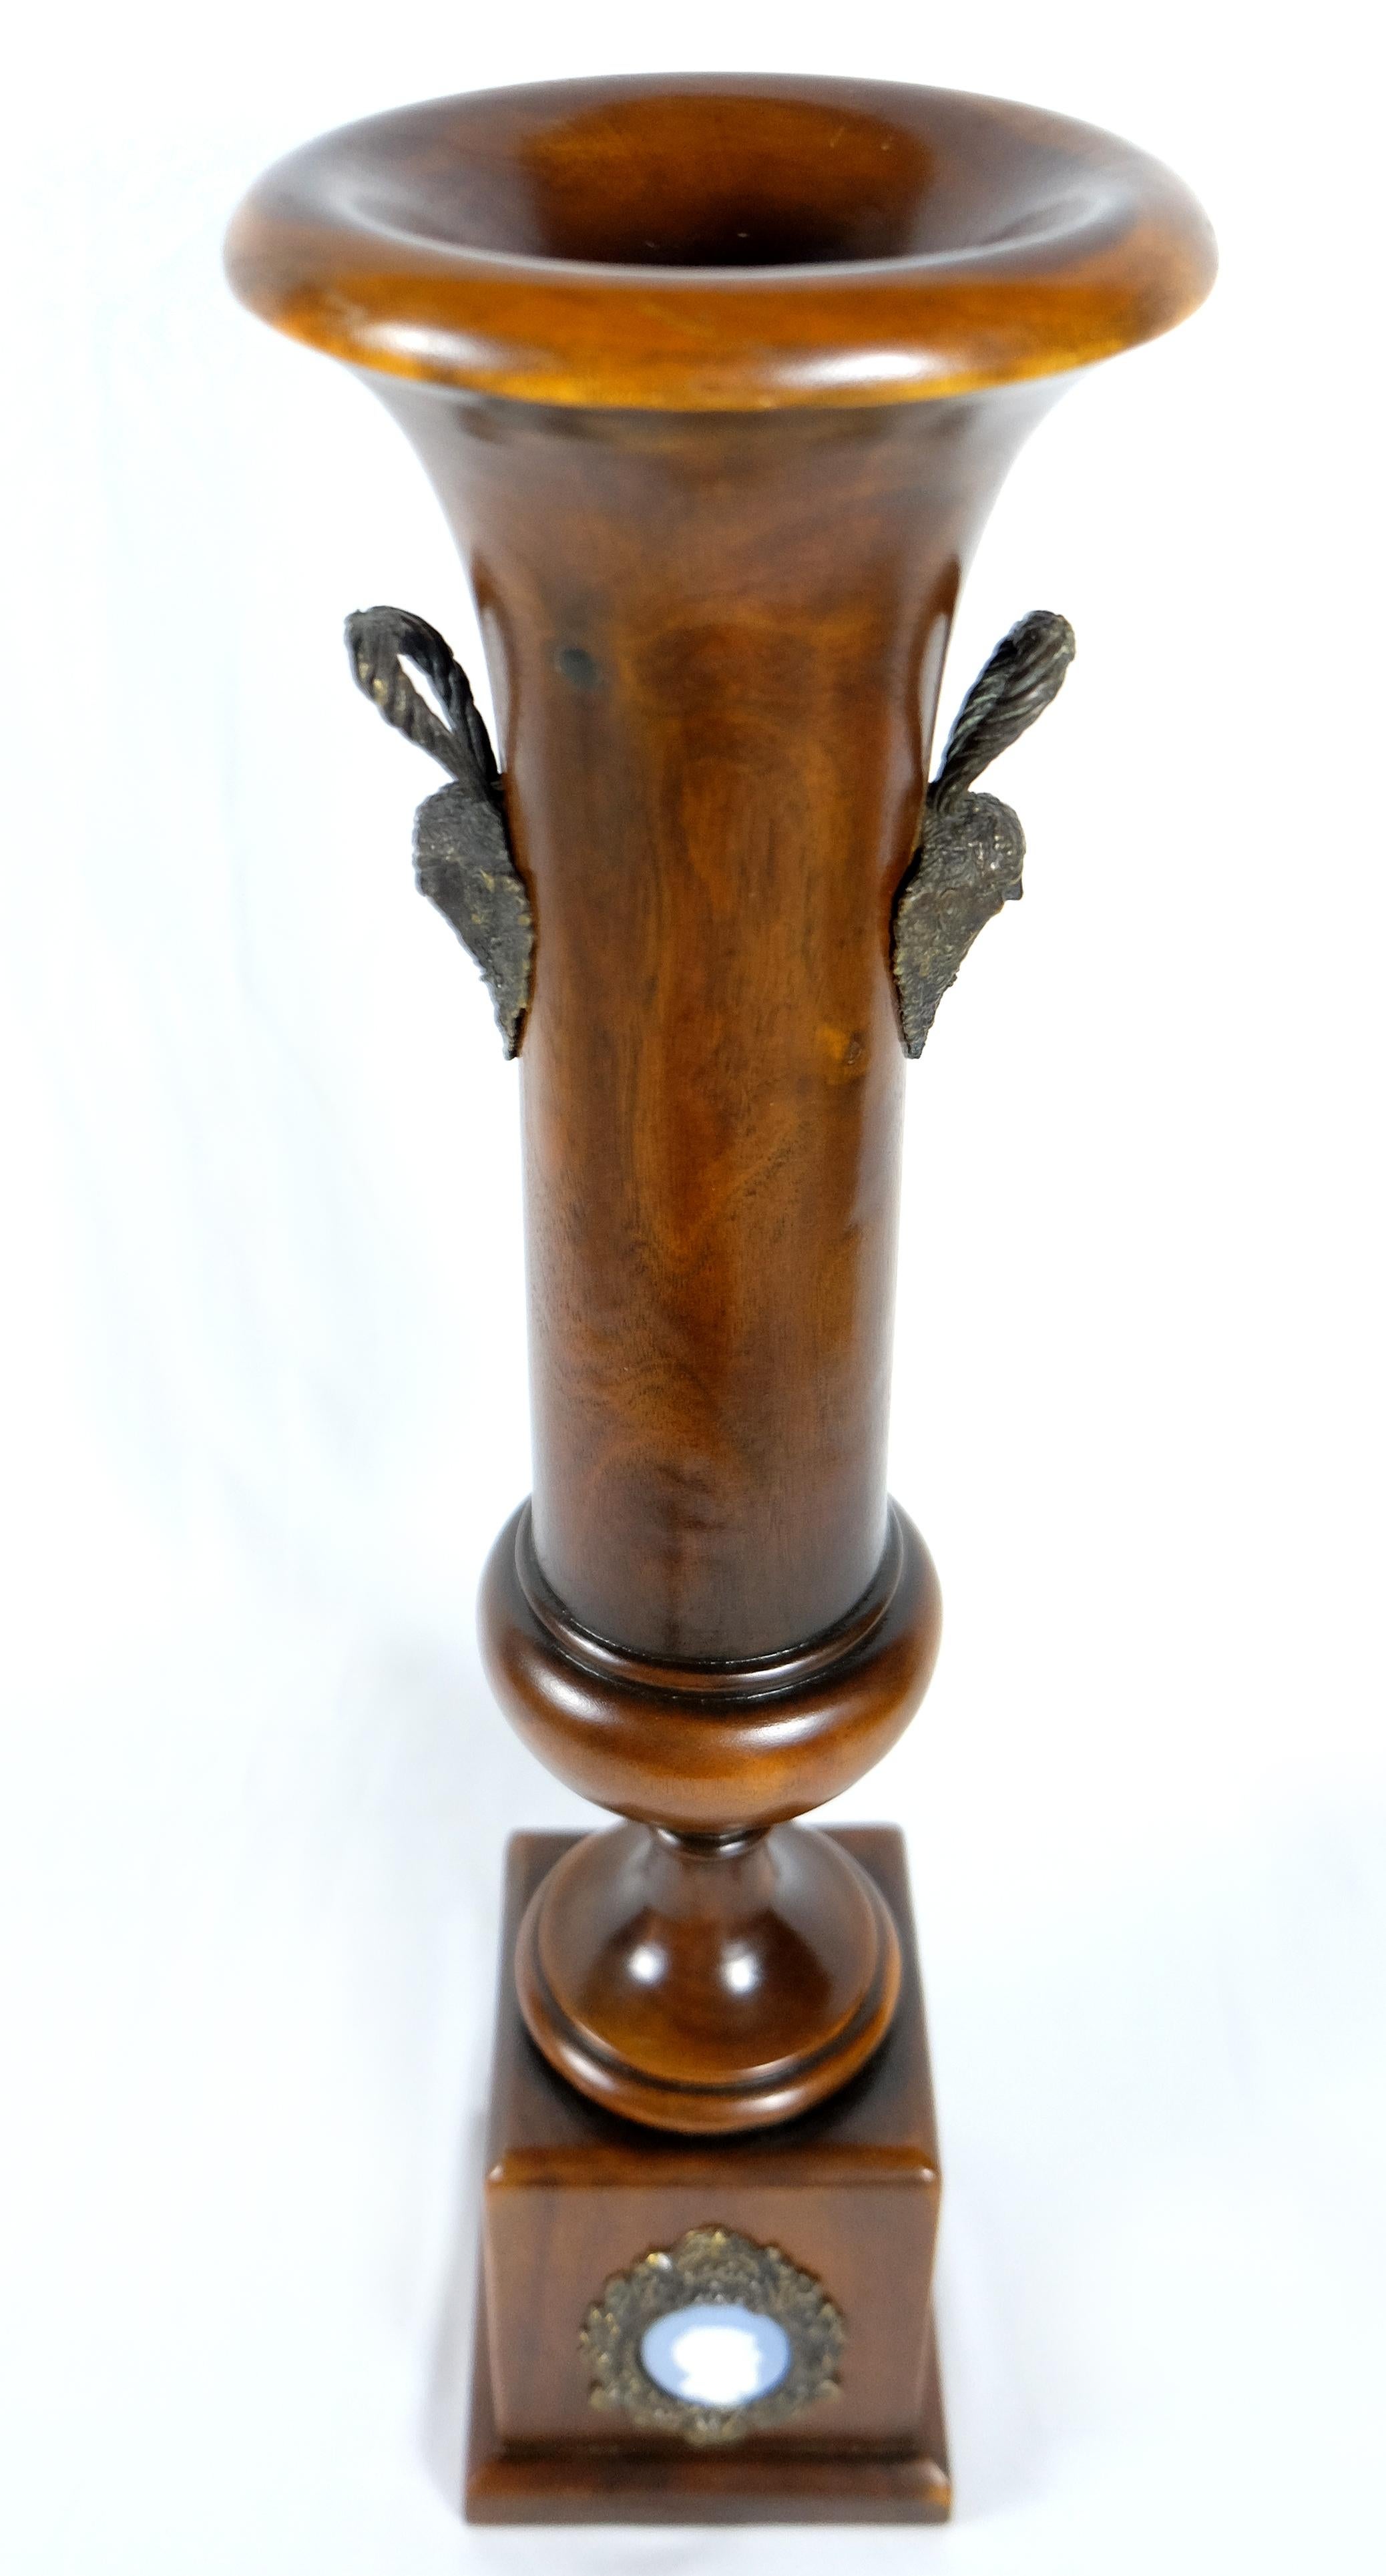 Wooden Pedestal Urn Vase by Theodore Alexander with Bronze and Cameo Details 3